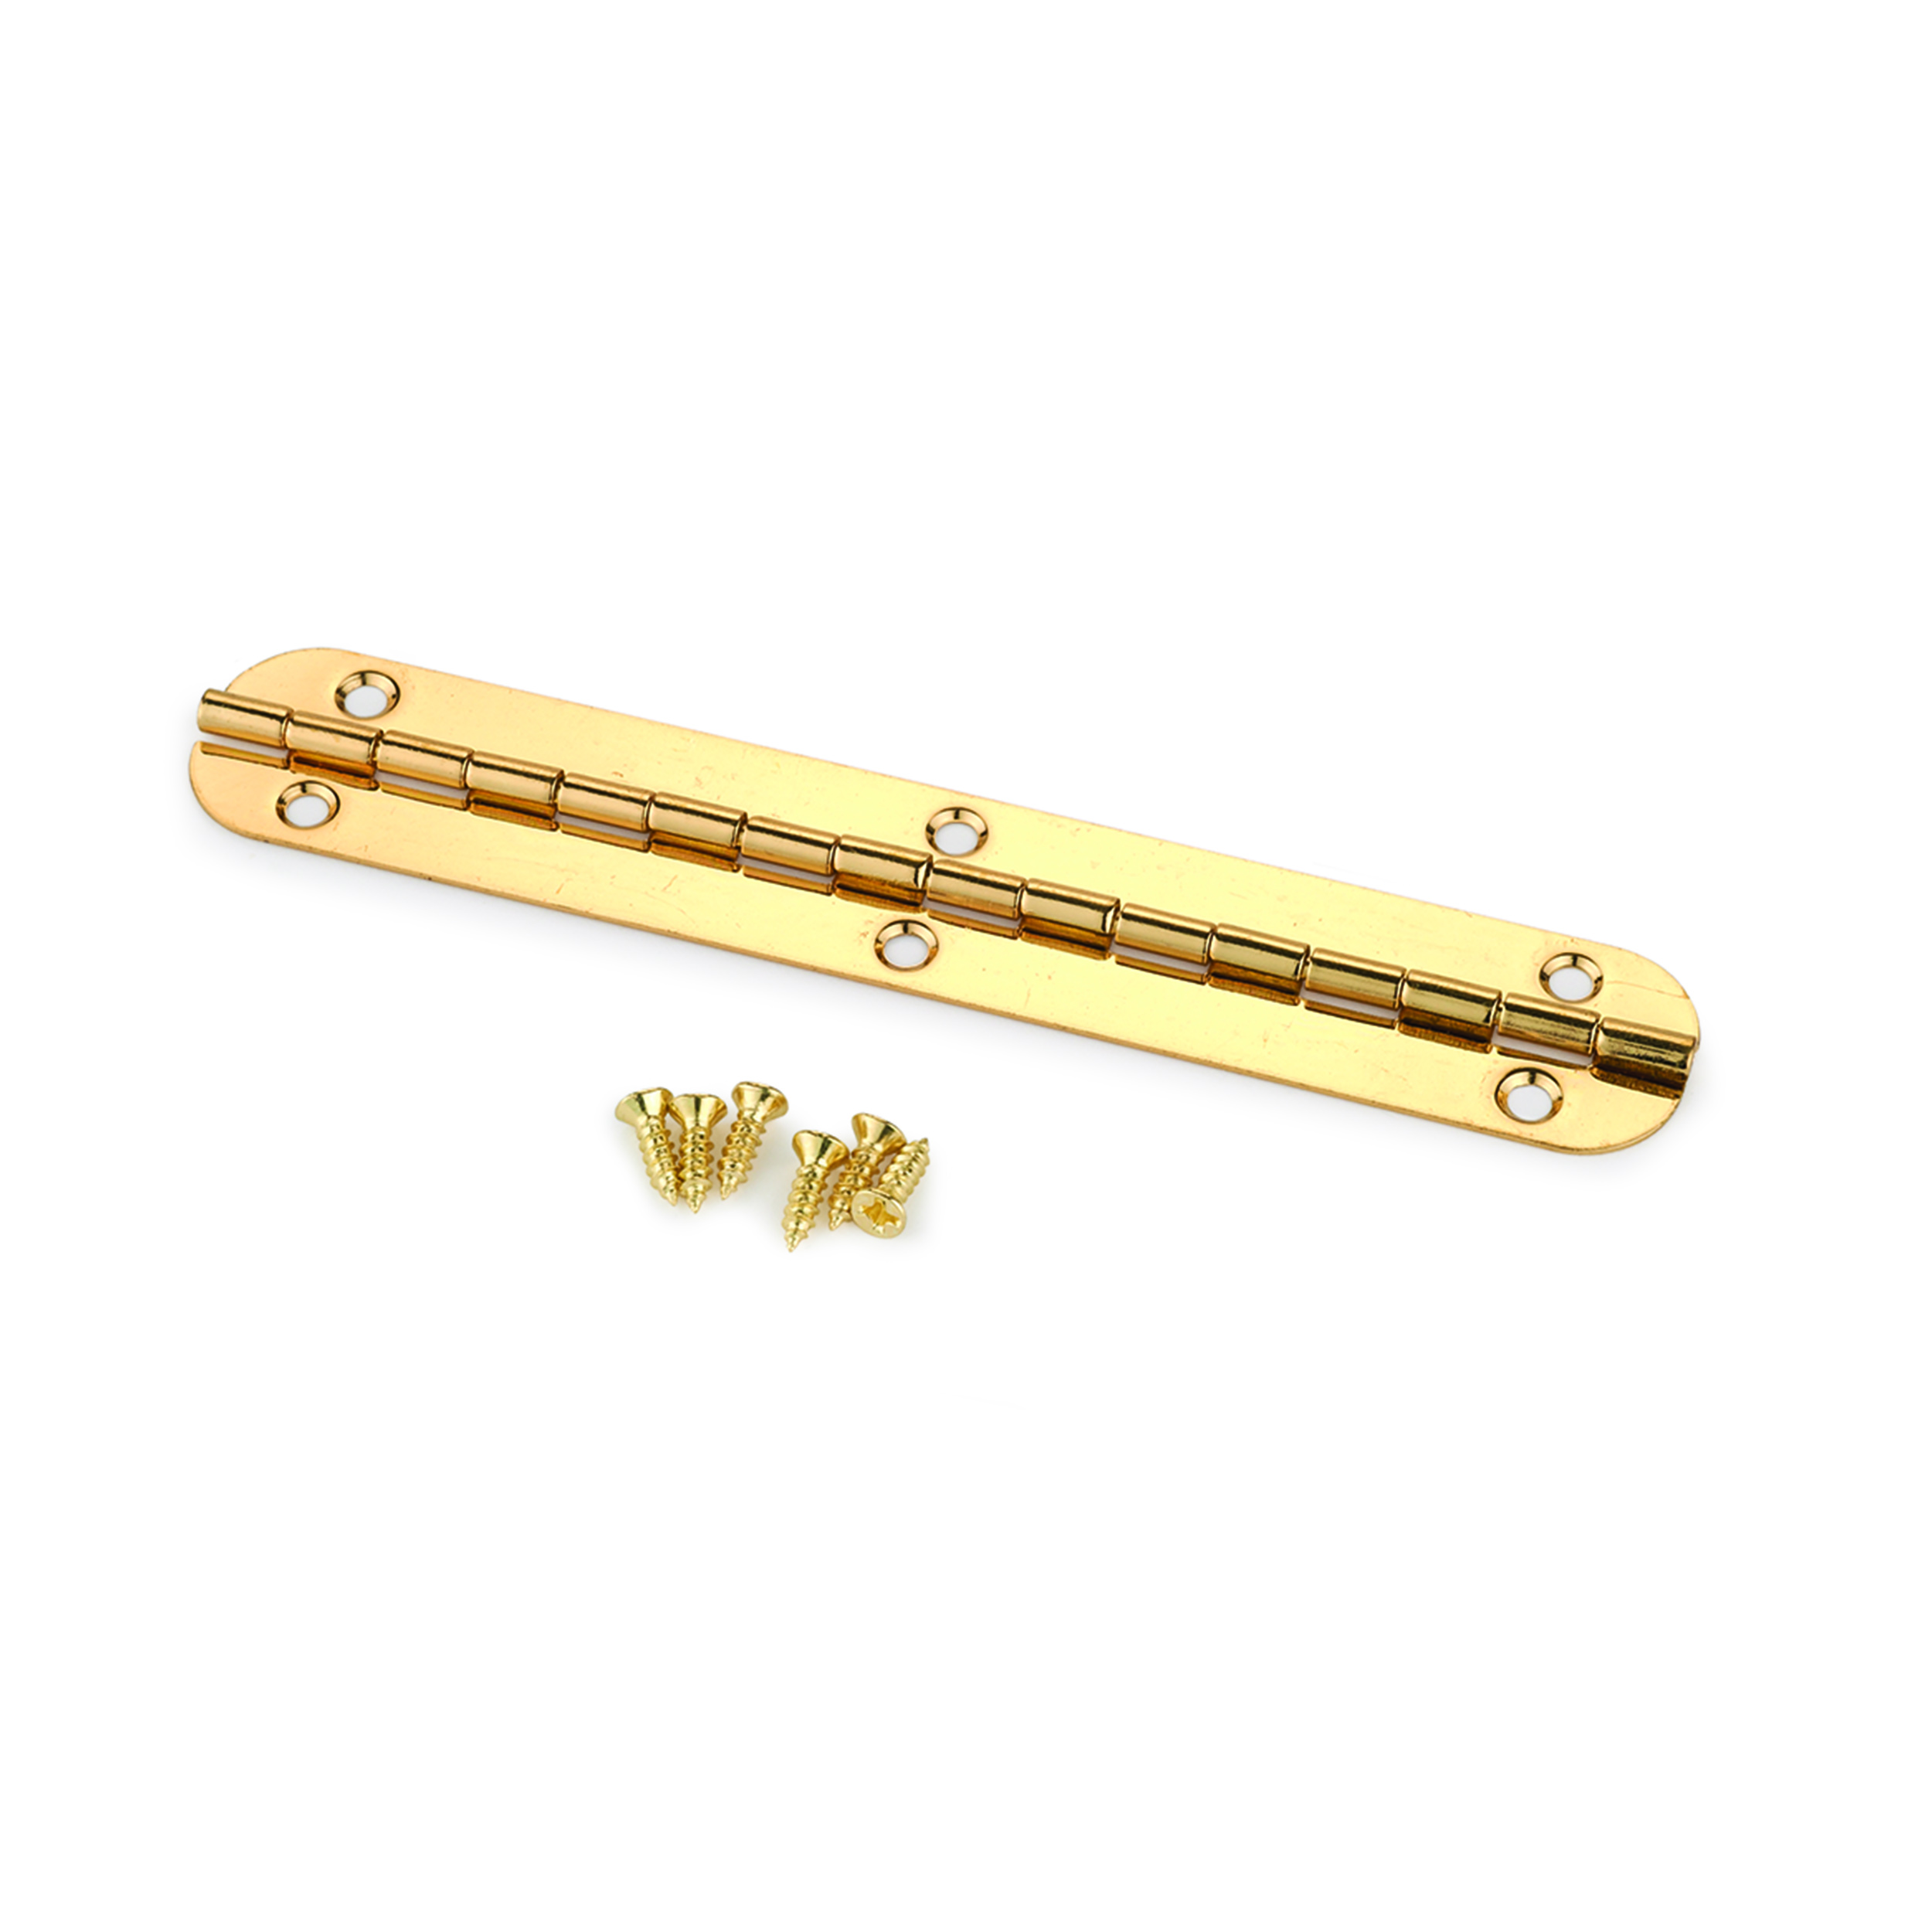 Small Piano Hinge Brass Plated 102mm X 17mm